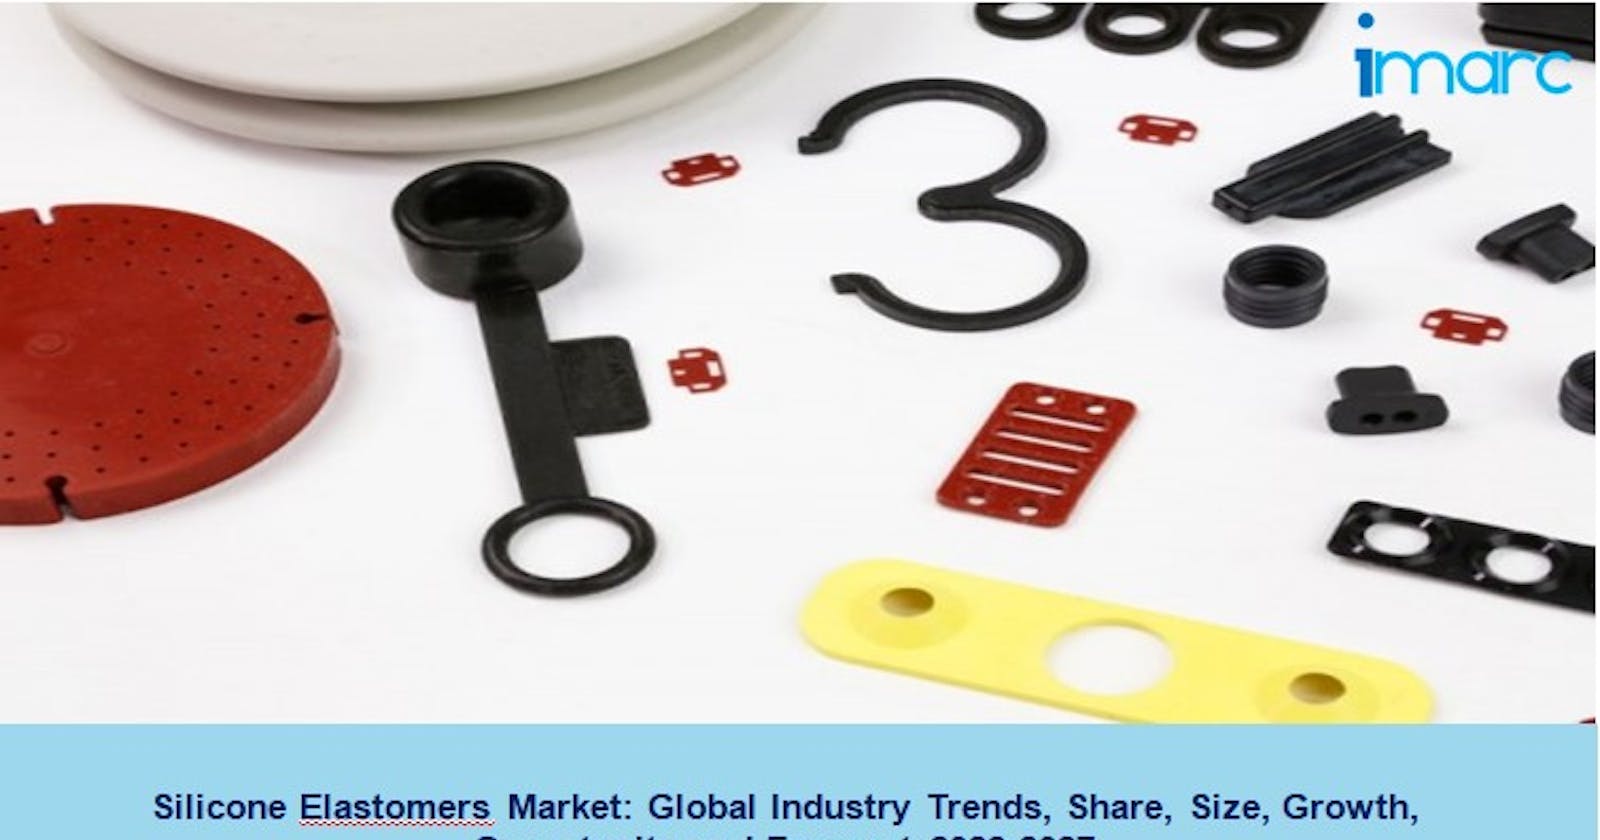 Silicone Elastomers Market Size, Share, Growth and Forecast 2022-2027